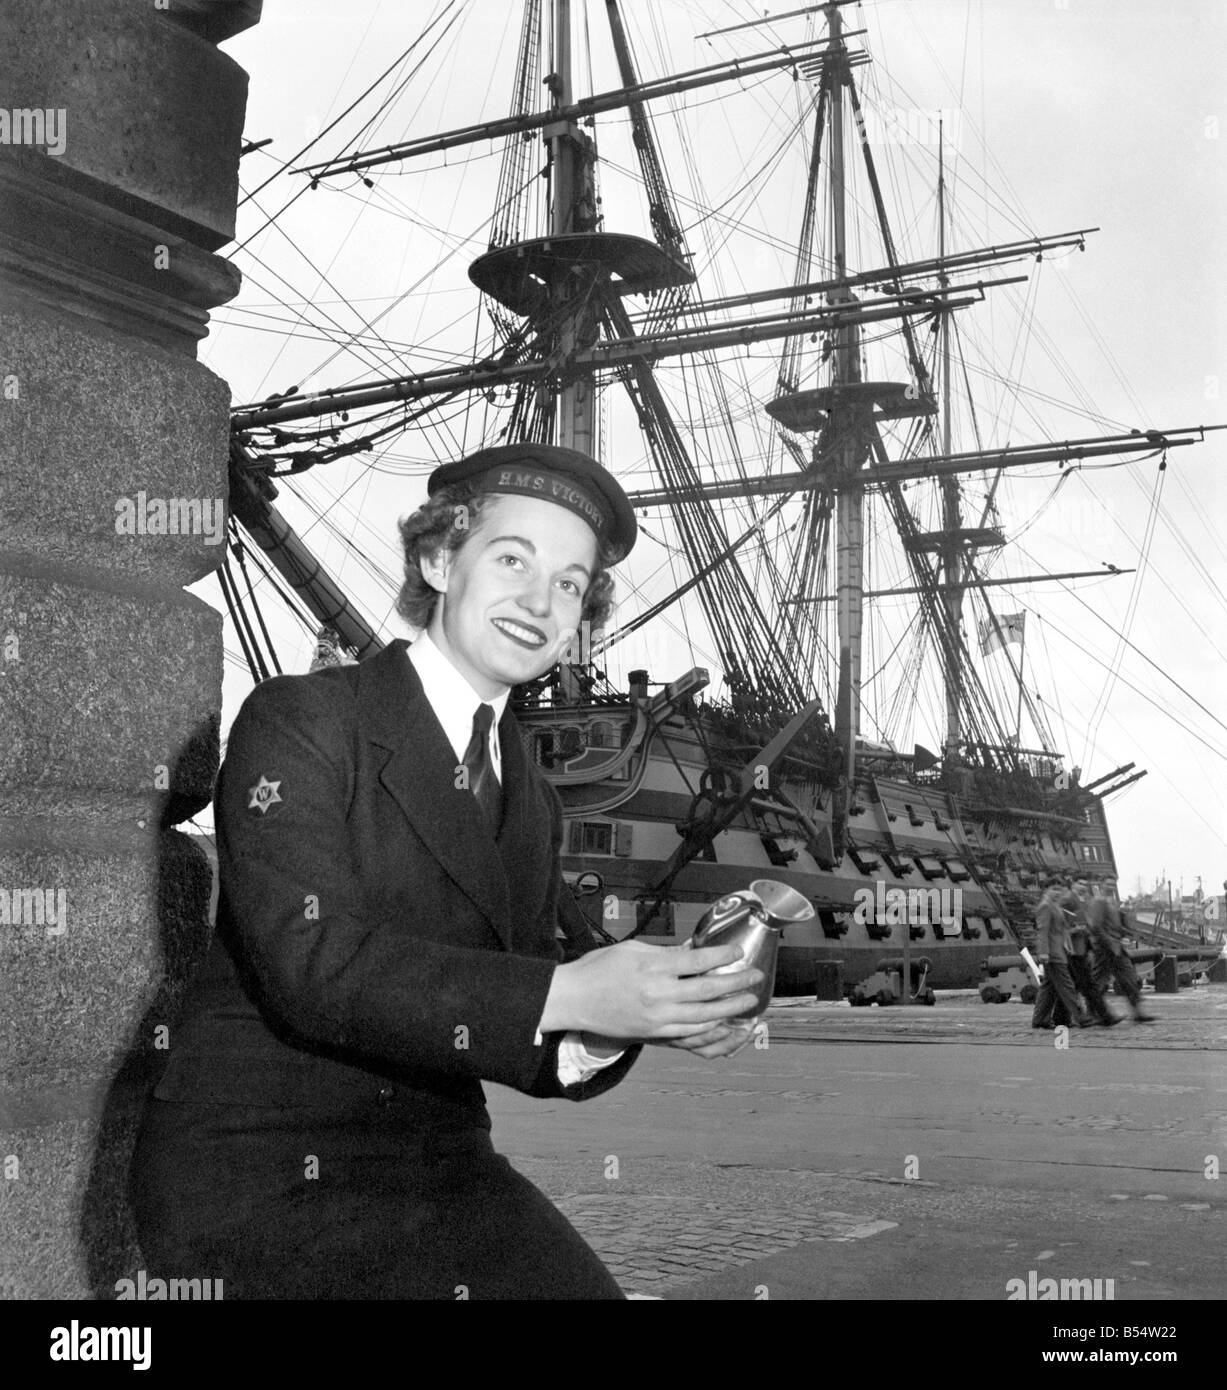 Royal Navy HMS Victory: WREN Margaret Mann 19 a winter in the navy, and Wren Joan Wallen age 20 of Radar Dept. They are intersted in a rum measure used aboard. The victory in Nelson days. October 1953 D615-002 Stock Photo